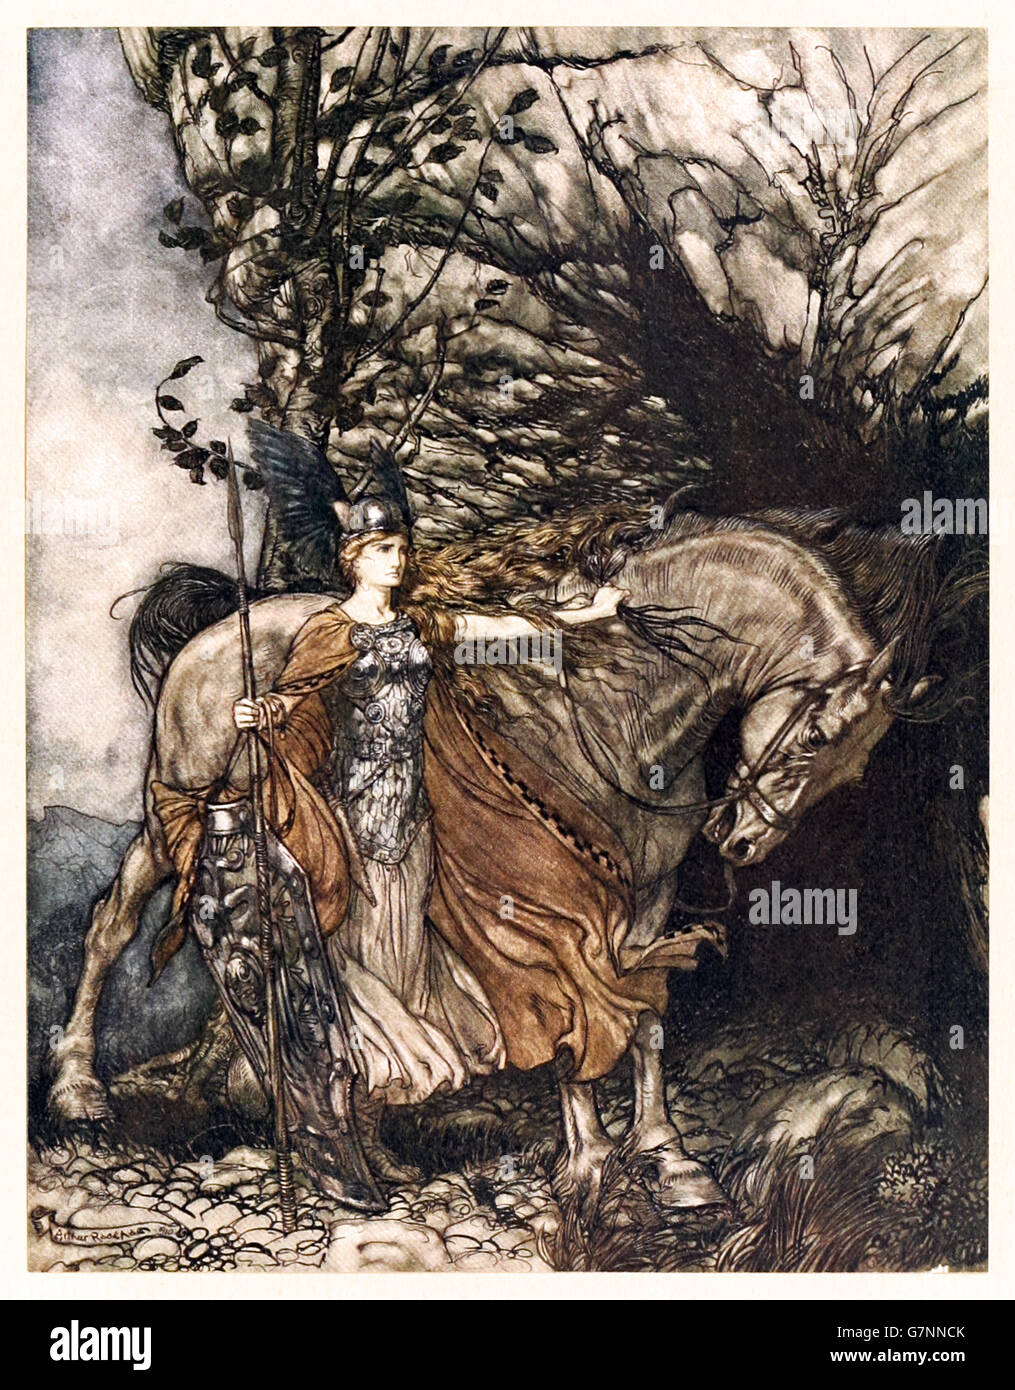 “Brunnhilde with her horse, at the mouth of the cave” from ‘The Rhinegold & the Valkyrie’ illustrated by Arthur Rackham (1867-1939), published in 1910. Brünnhilde is instructed by Wotan to protect Siegmund in his coming fight with Hunding. Stock Photo